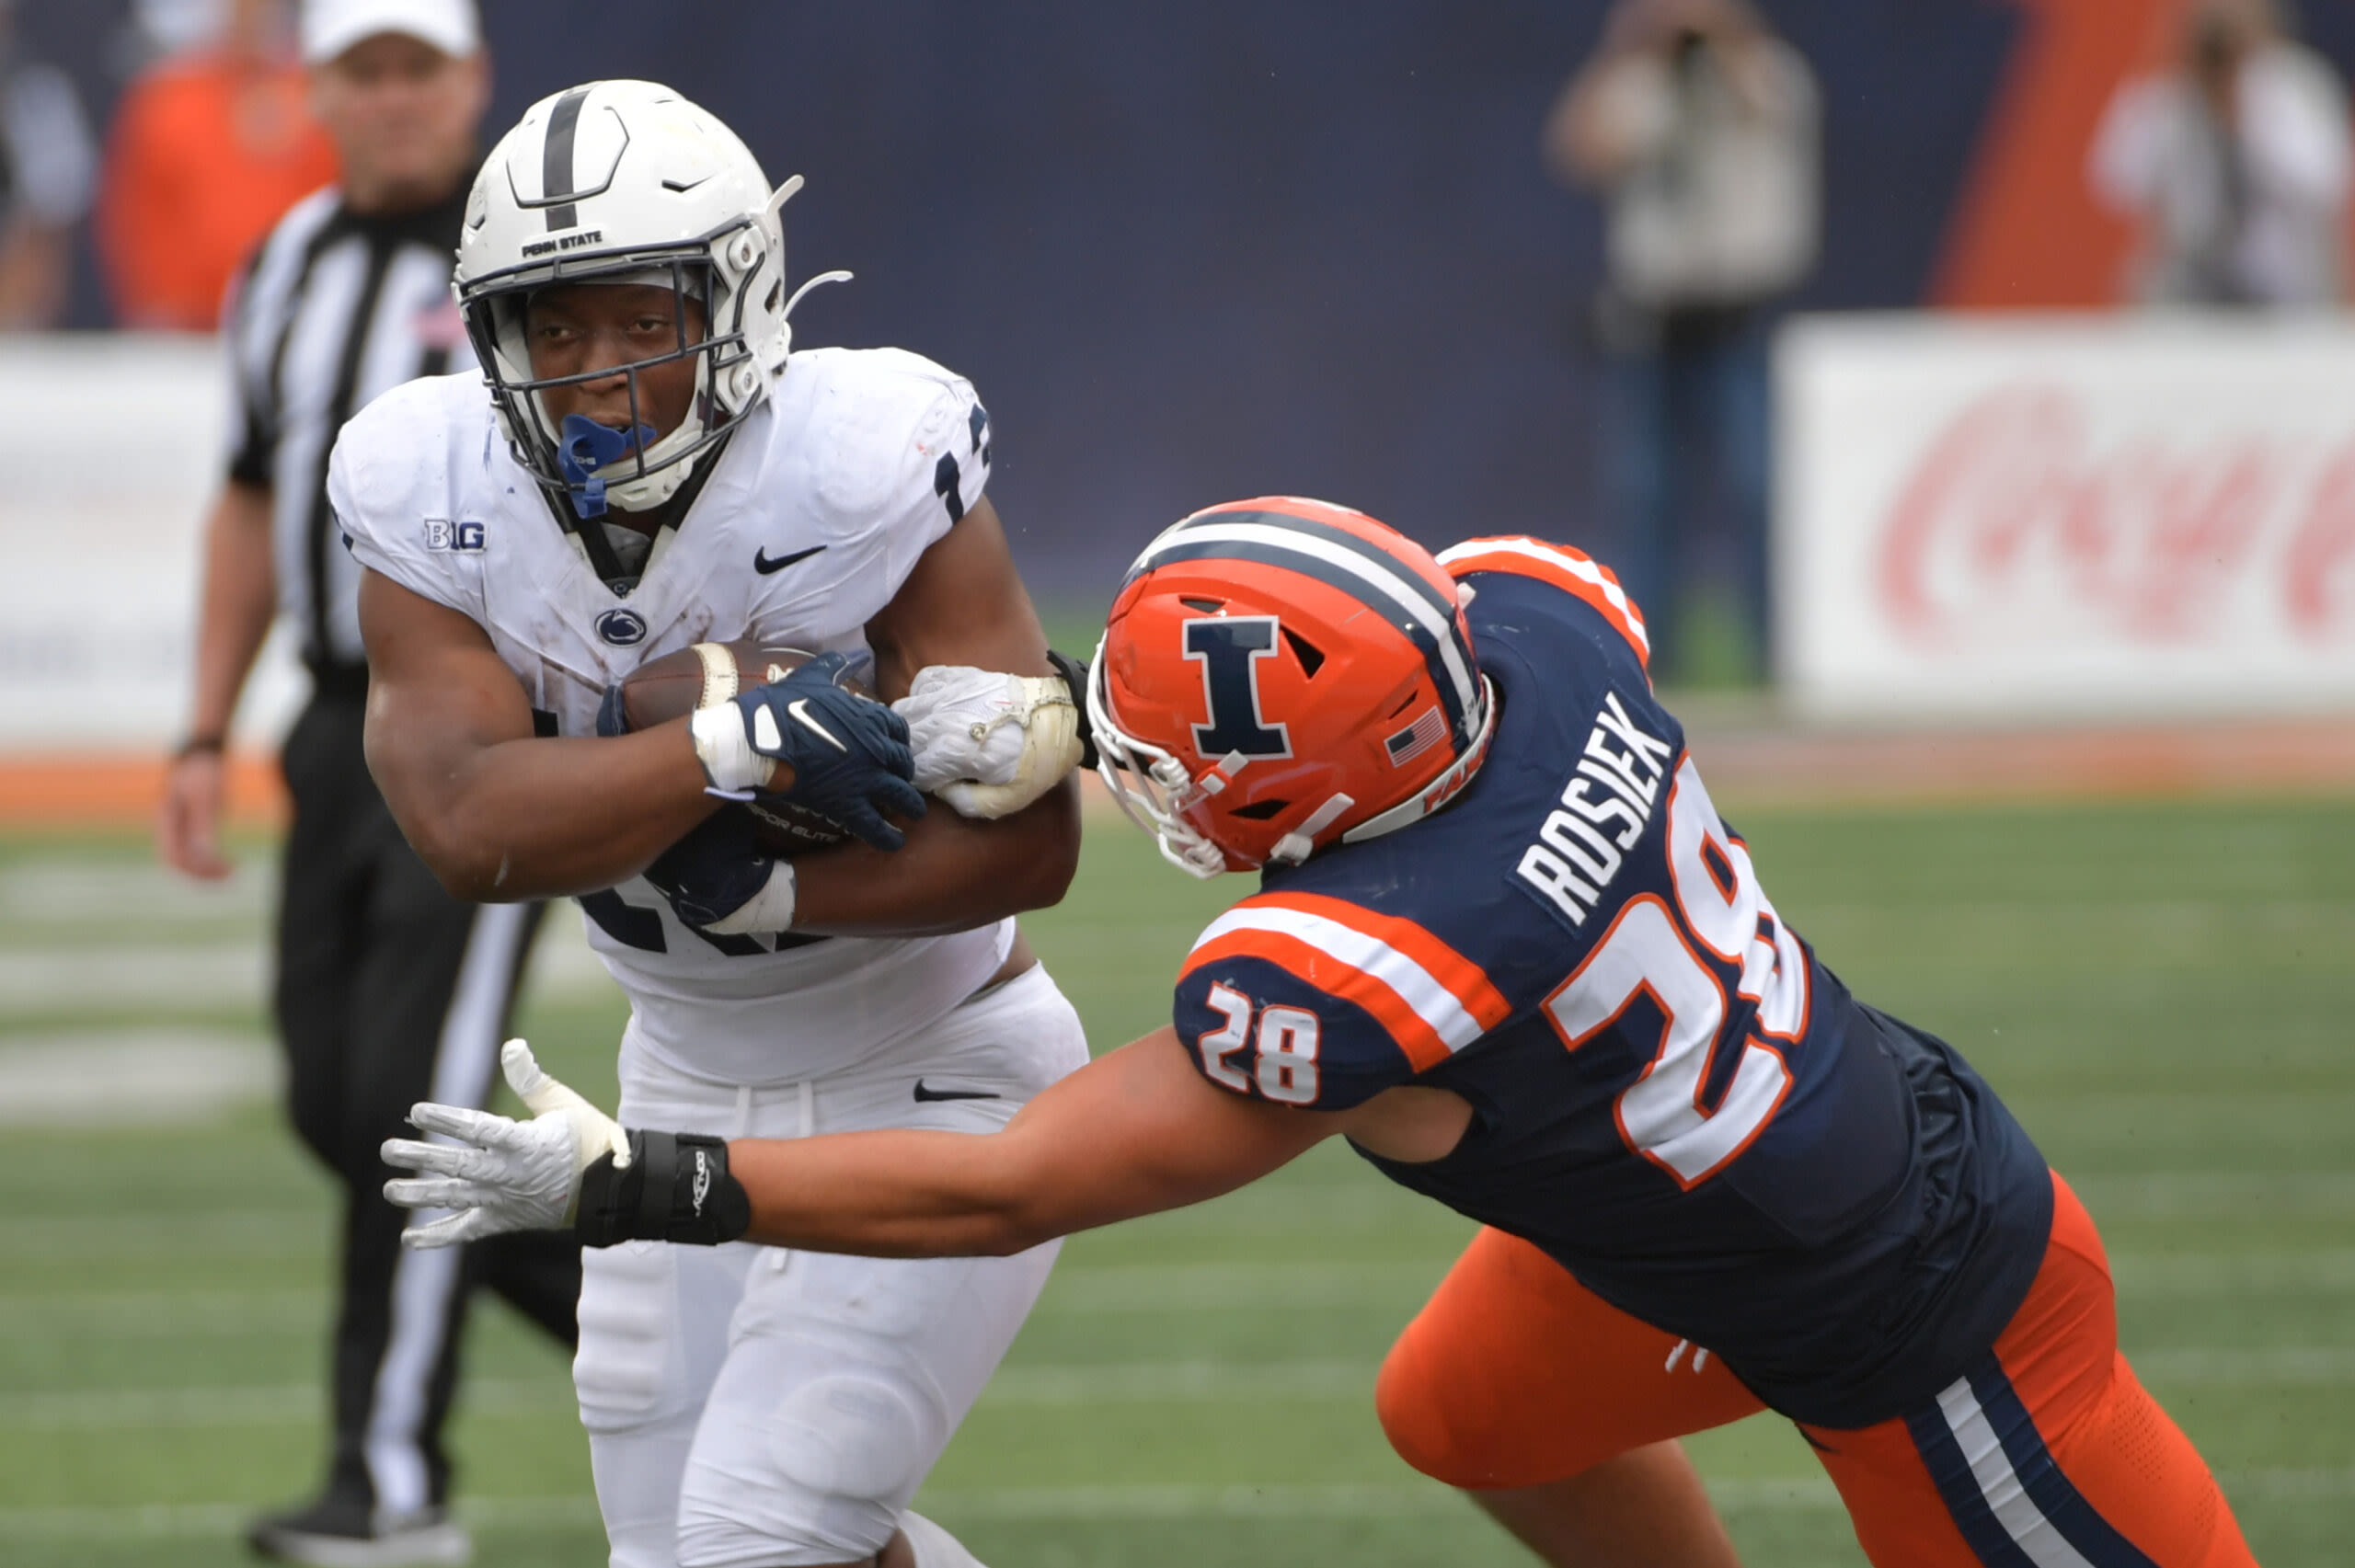 Fox Friday night lineup gives Penn State opponent extra rest before facing Nittany Lions